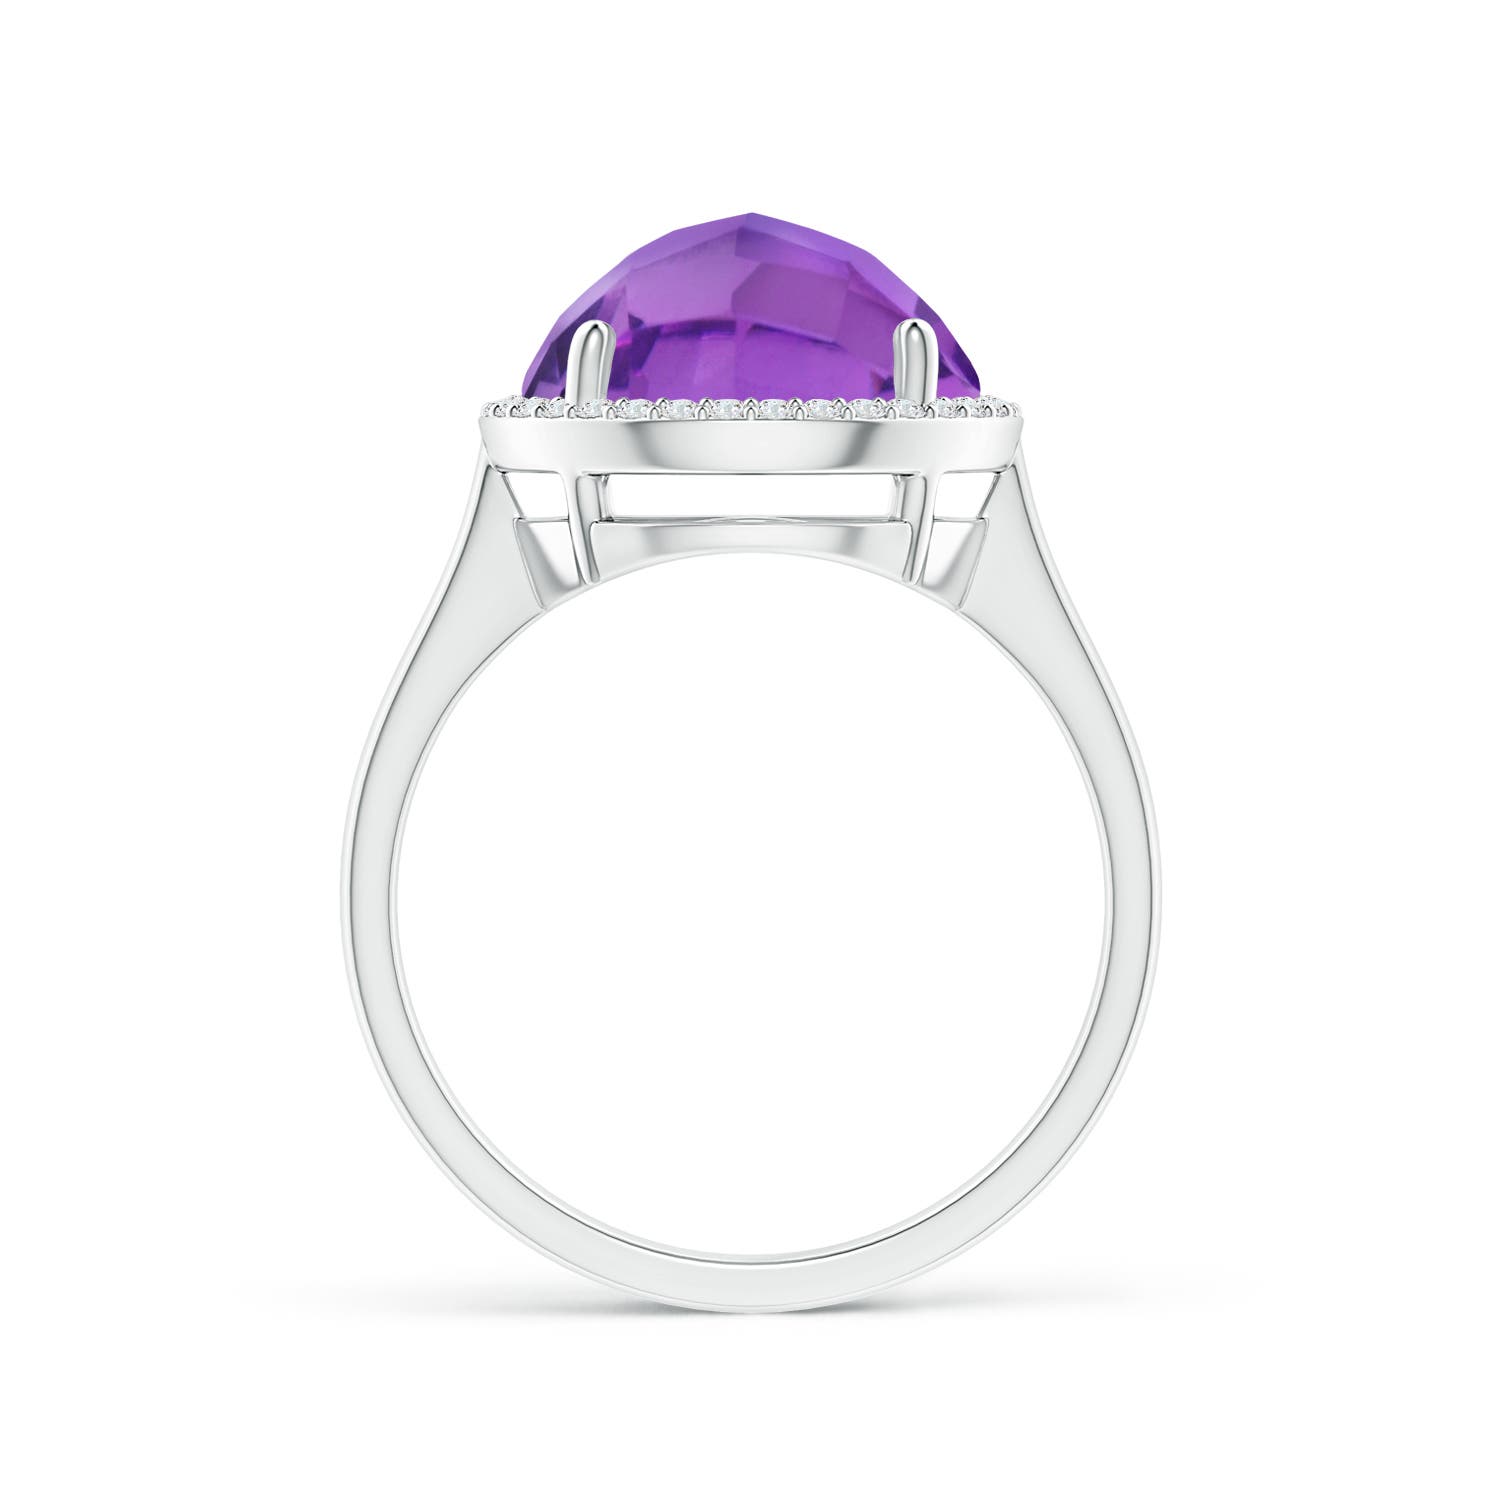 AA - Amethyst / 5.02 CT / 14 KT White Gold